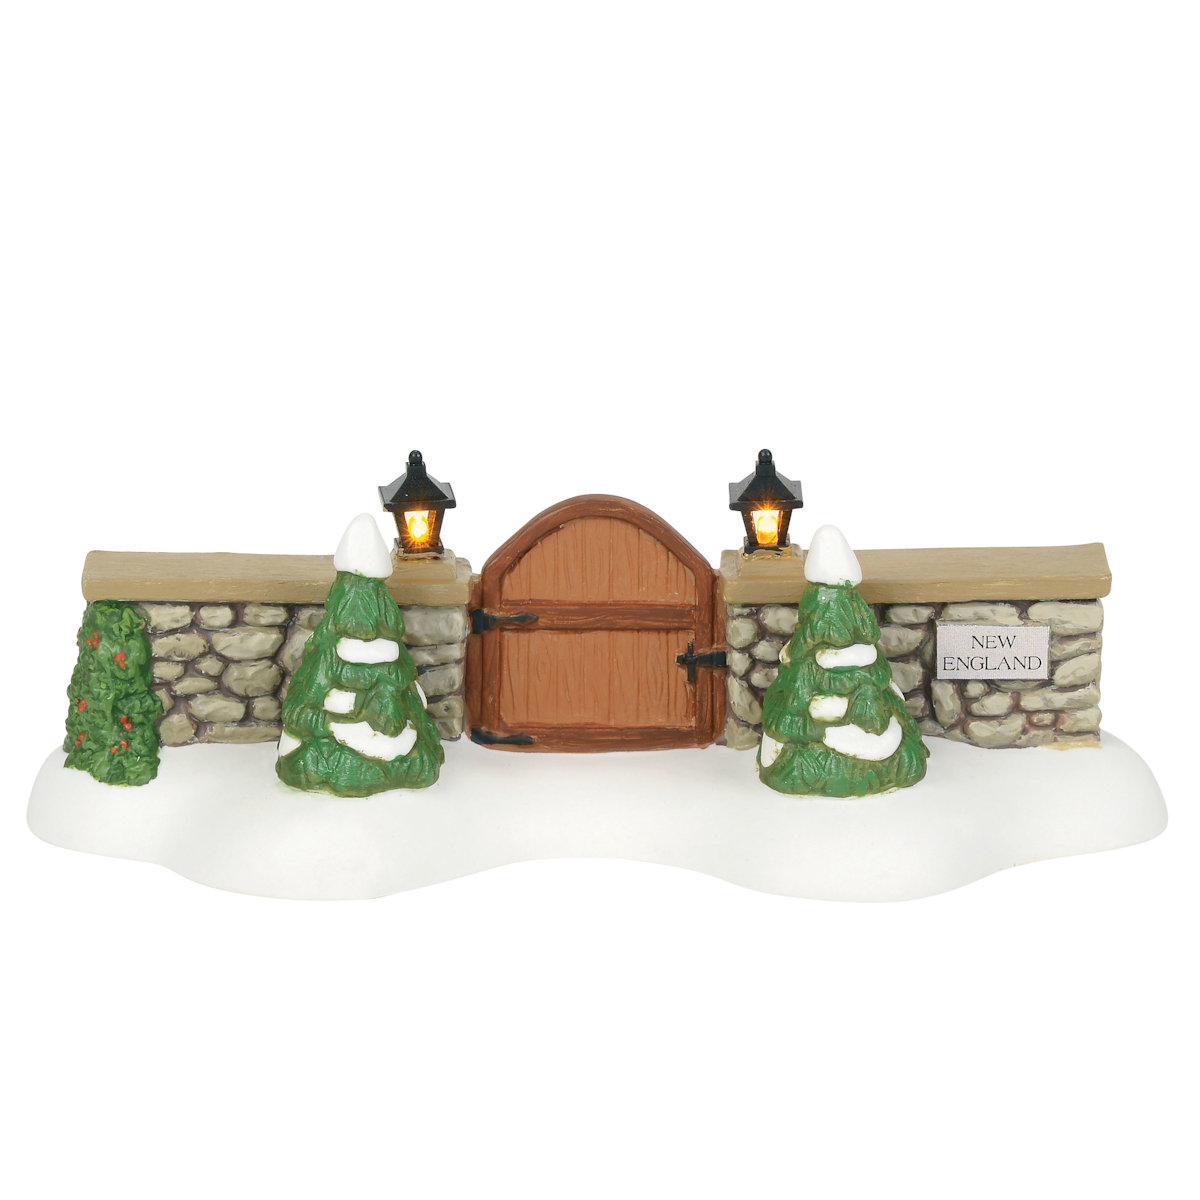 Department 56 New England Village New England Village Gate Accessory